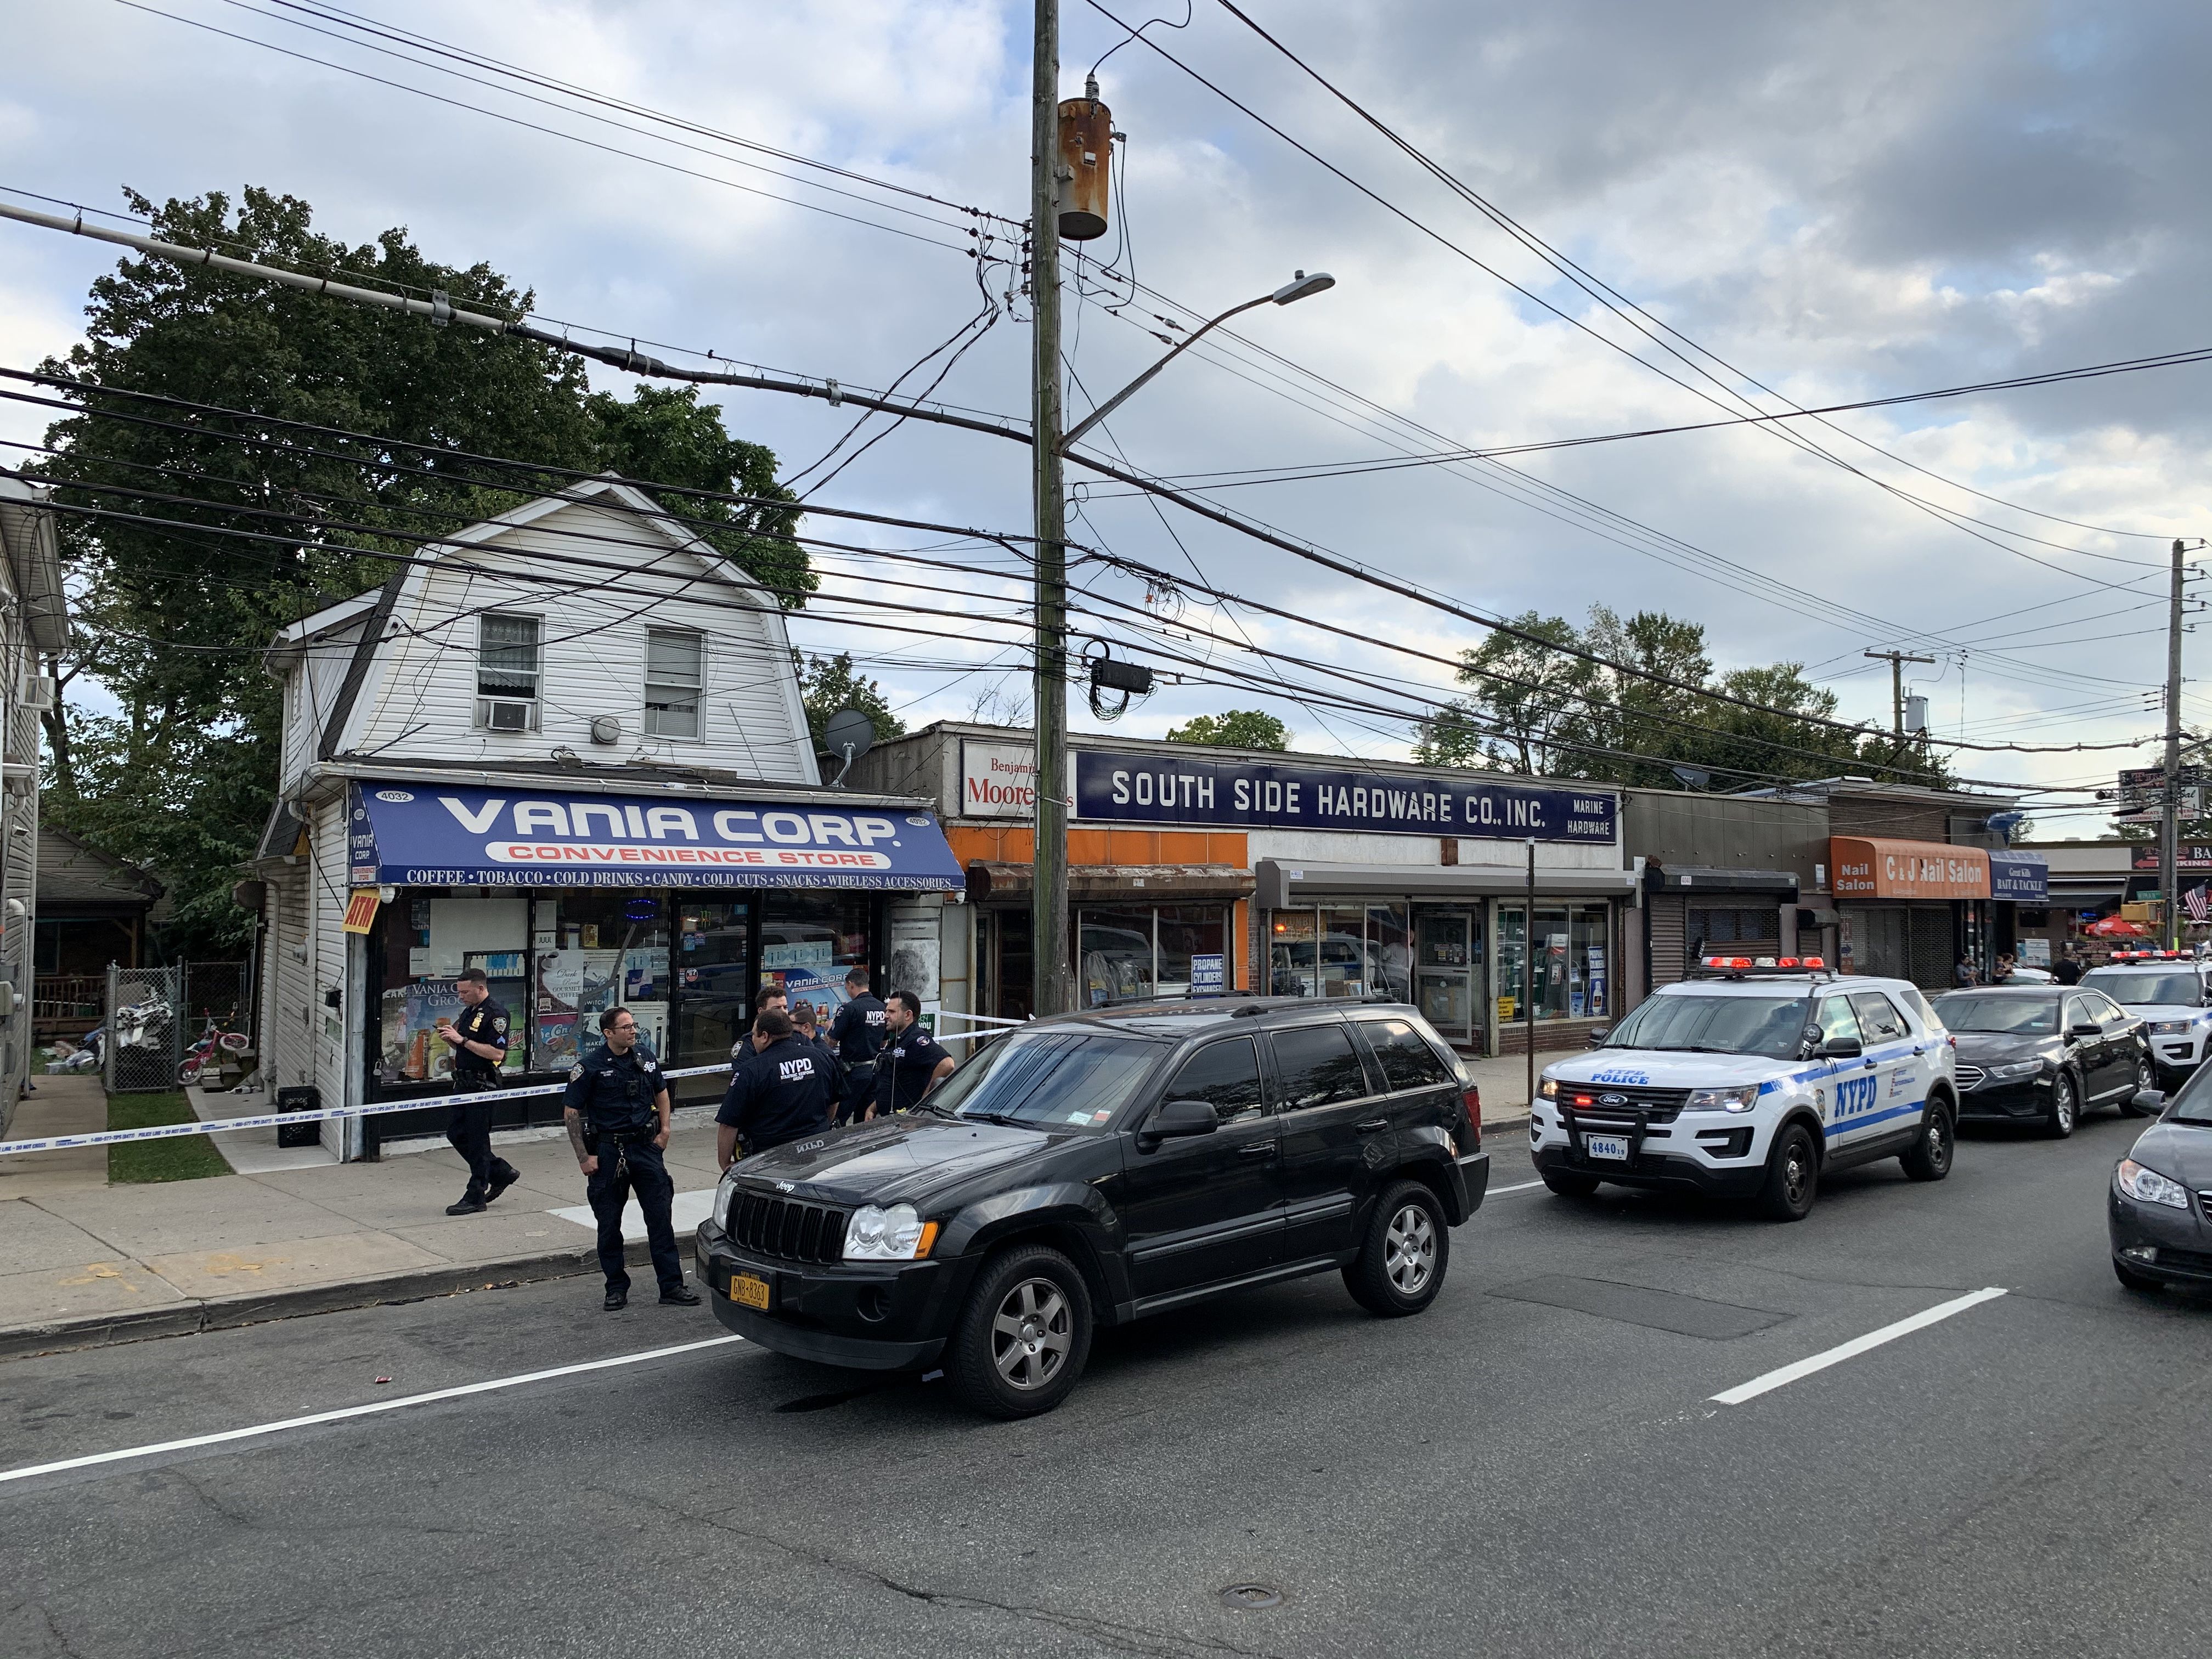 NYPD responding to stabbing in Great Kills; 1 person injured 